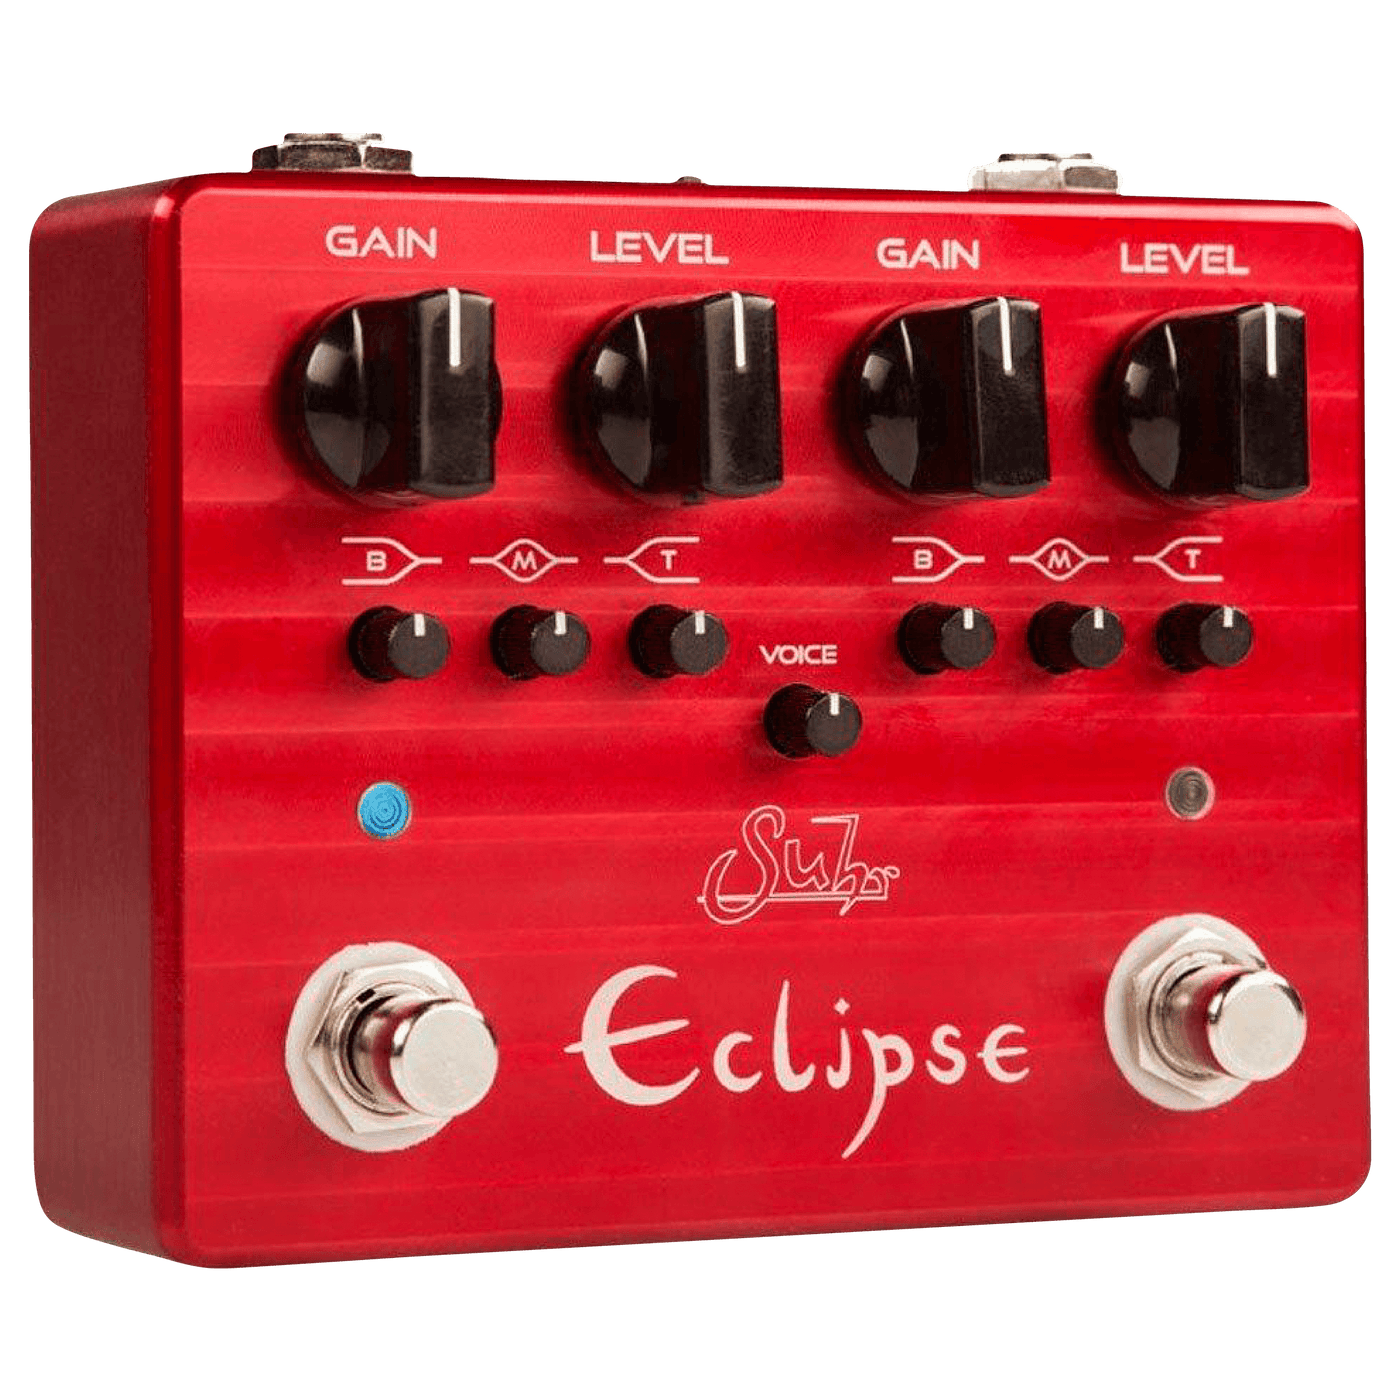 Suhr Eclipse - $329990 - Gearhub - The Suhr Eclipse is a versatile, no compromise, dualchannel overdrive/distortion that delivers a wealth of warm, organic amp-like tones in an easy to use, compact form factor. Eclipse’s incredible versatility stems from its powerful and intuitive two channel circuit design. Each channel is completely independent, and features its own Gain, Level and 3-Band passive EQ, similar to a channel switching amplifier. Both channels can be voiced independently to accommodate all of